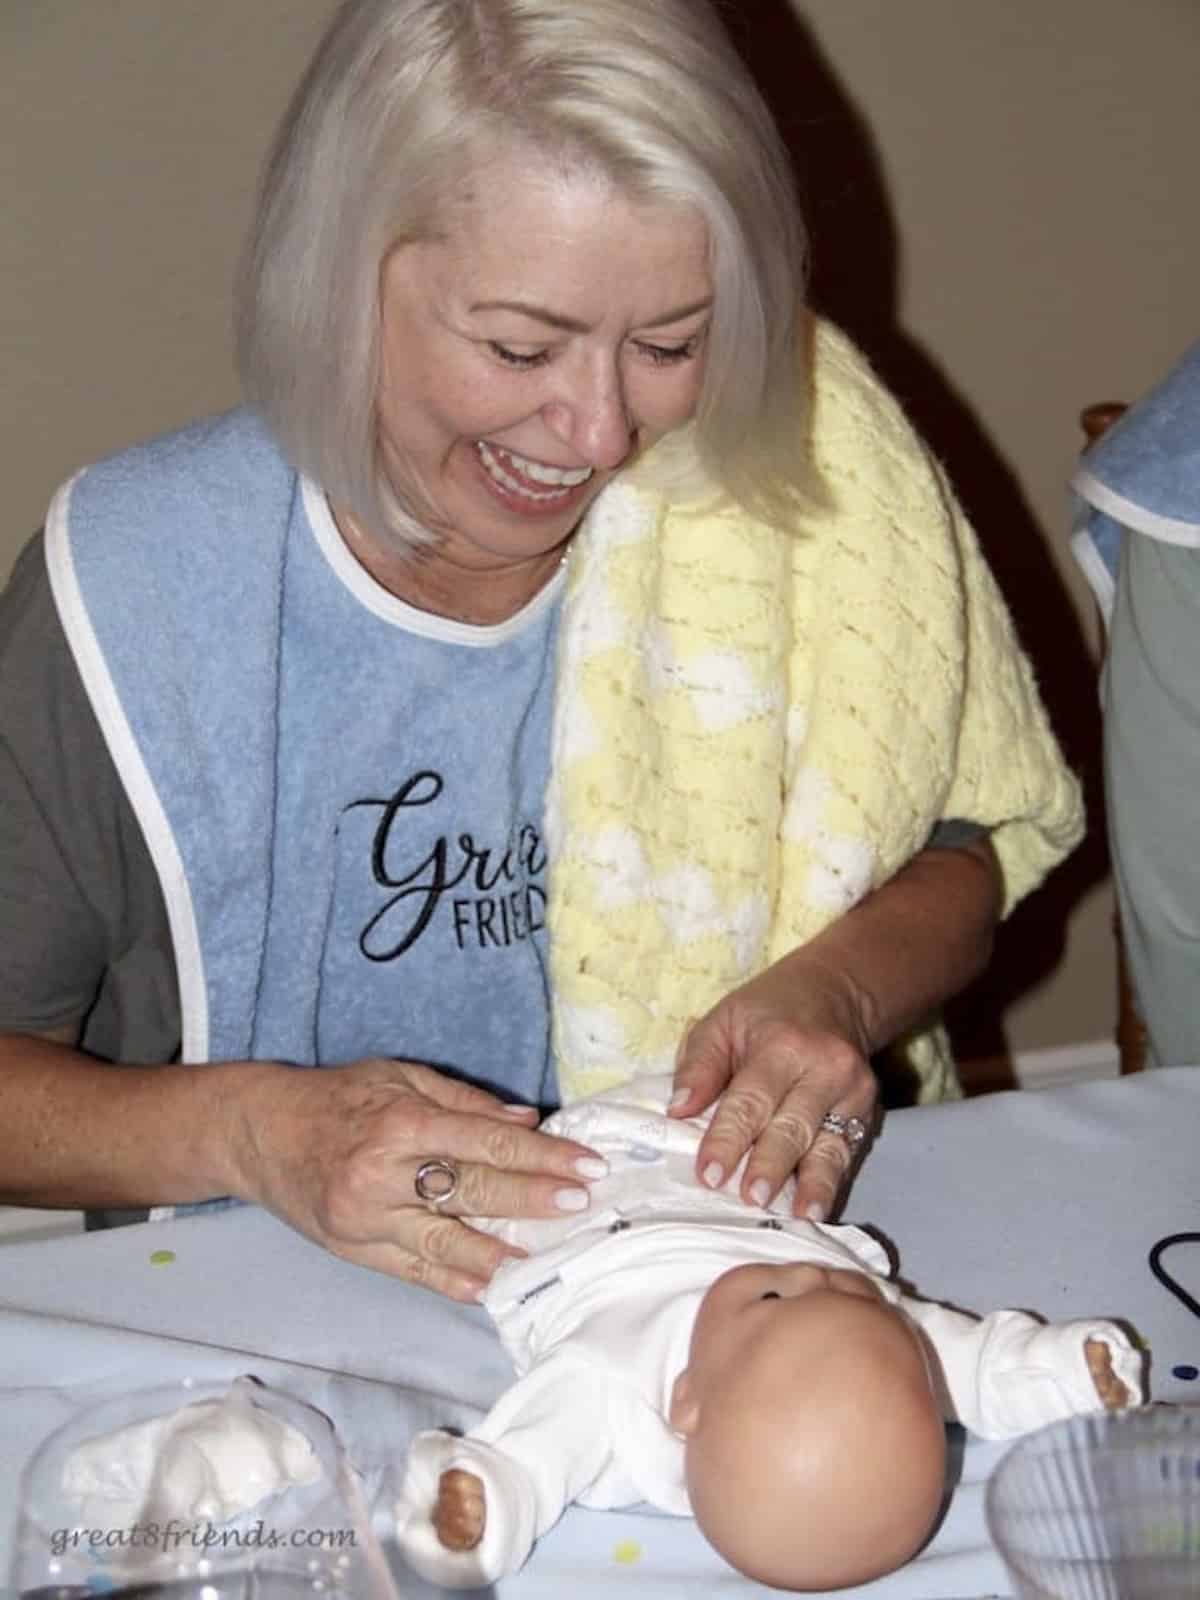 A woman putting a diaper on a baby doll on a table.